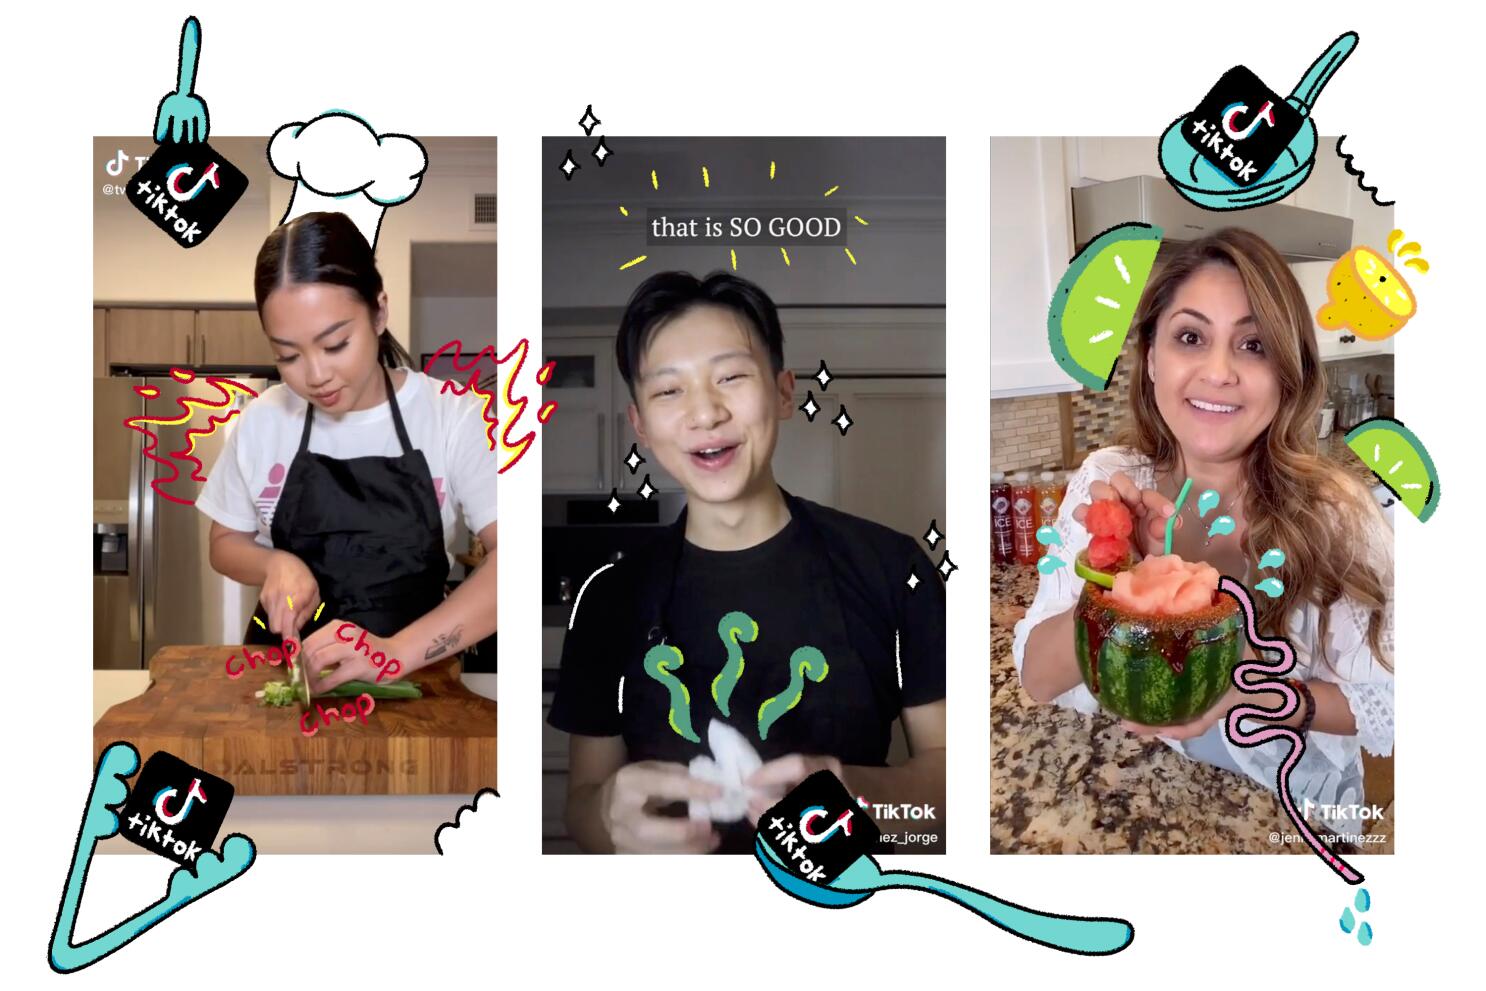 TikTok Kitchens will bring viral culinary creations to fans - The Verge